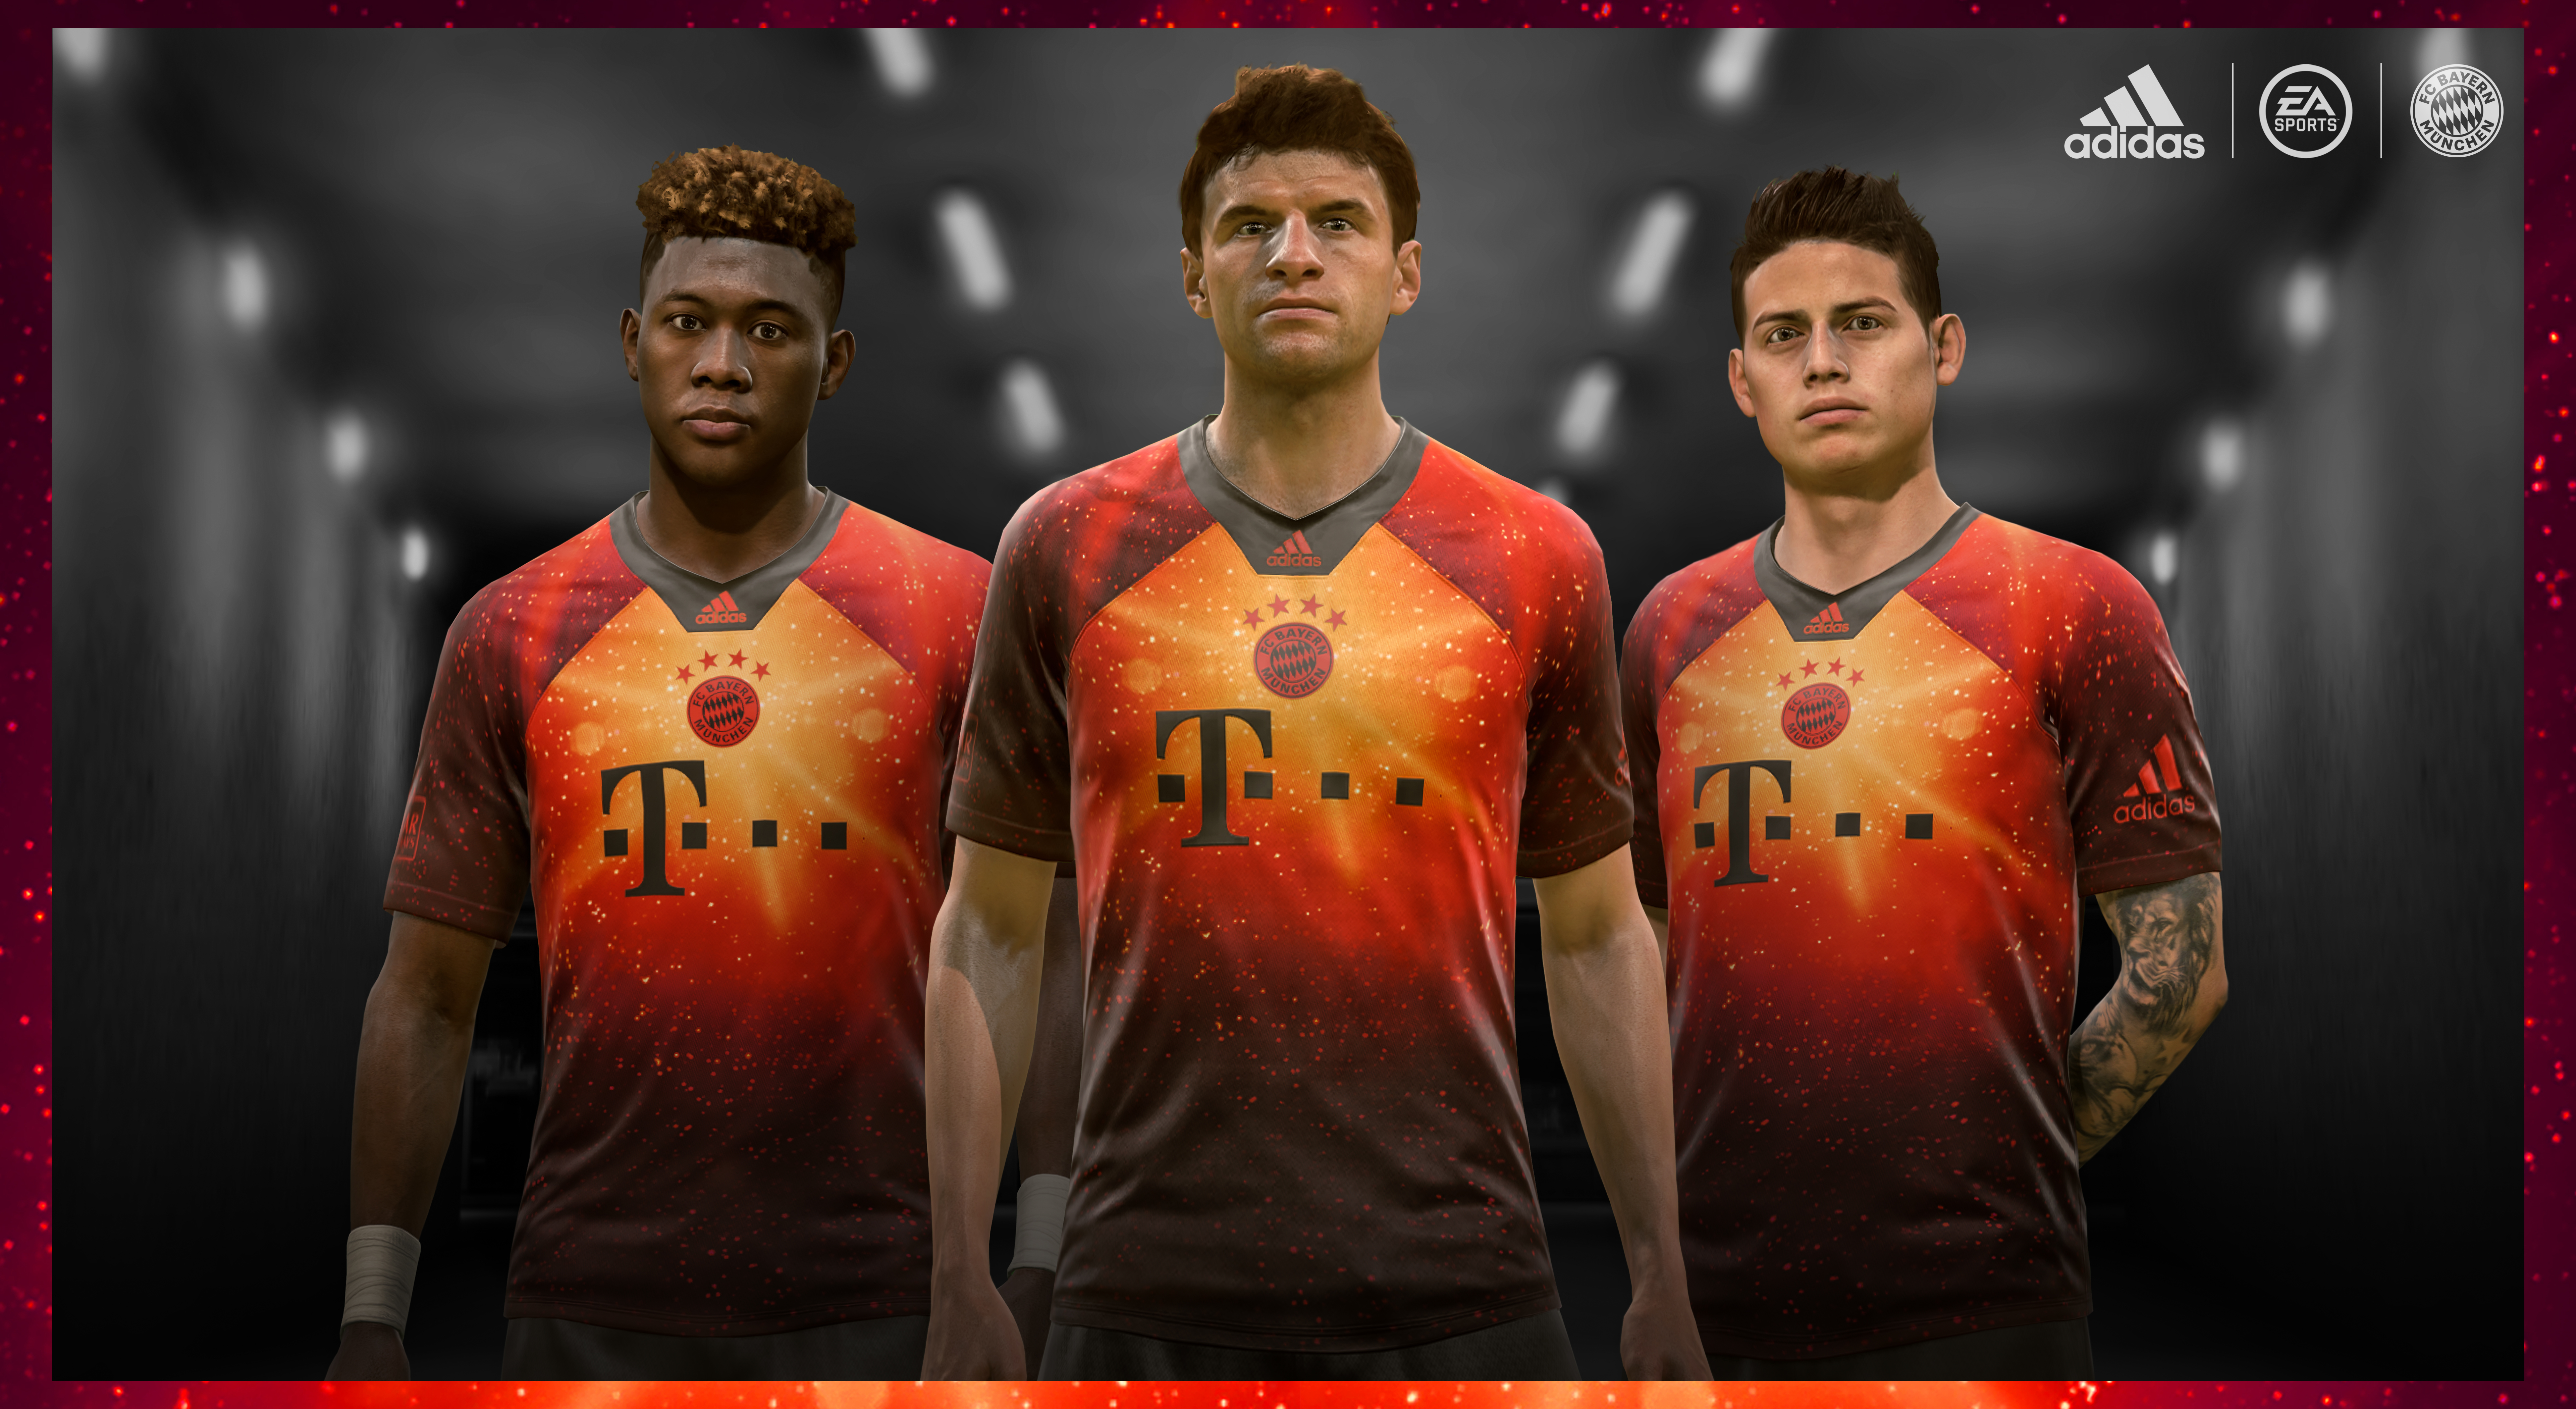 EA Sports \u0026 Adidas Release Limited Edition FIFA 19 Jersey Collection |  Balls.ie